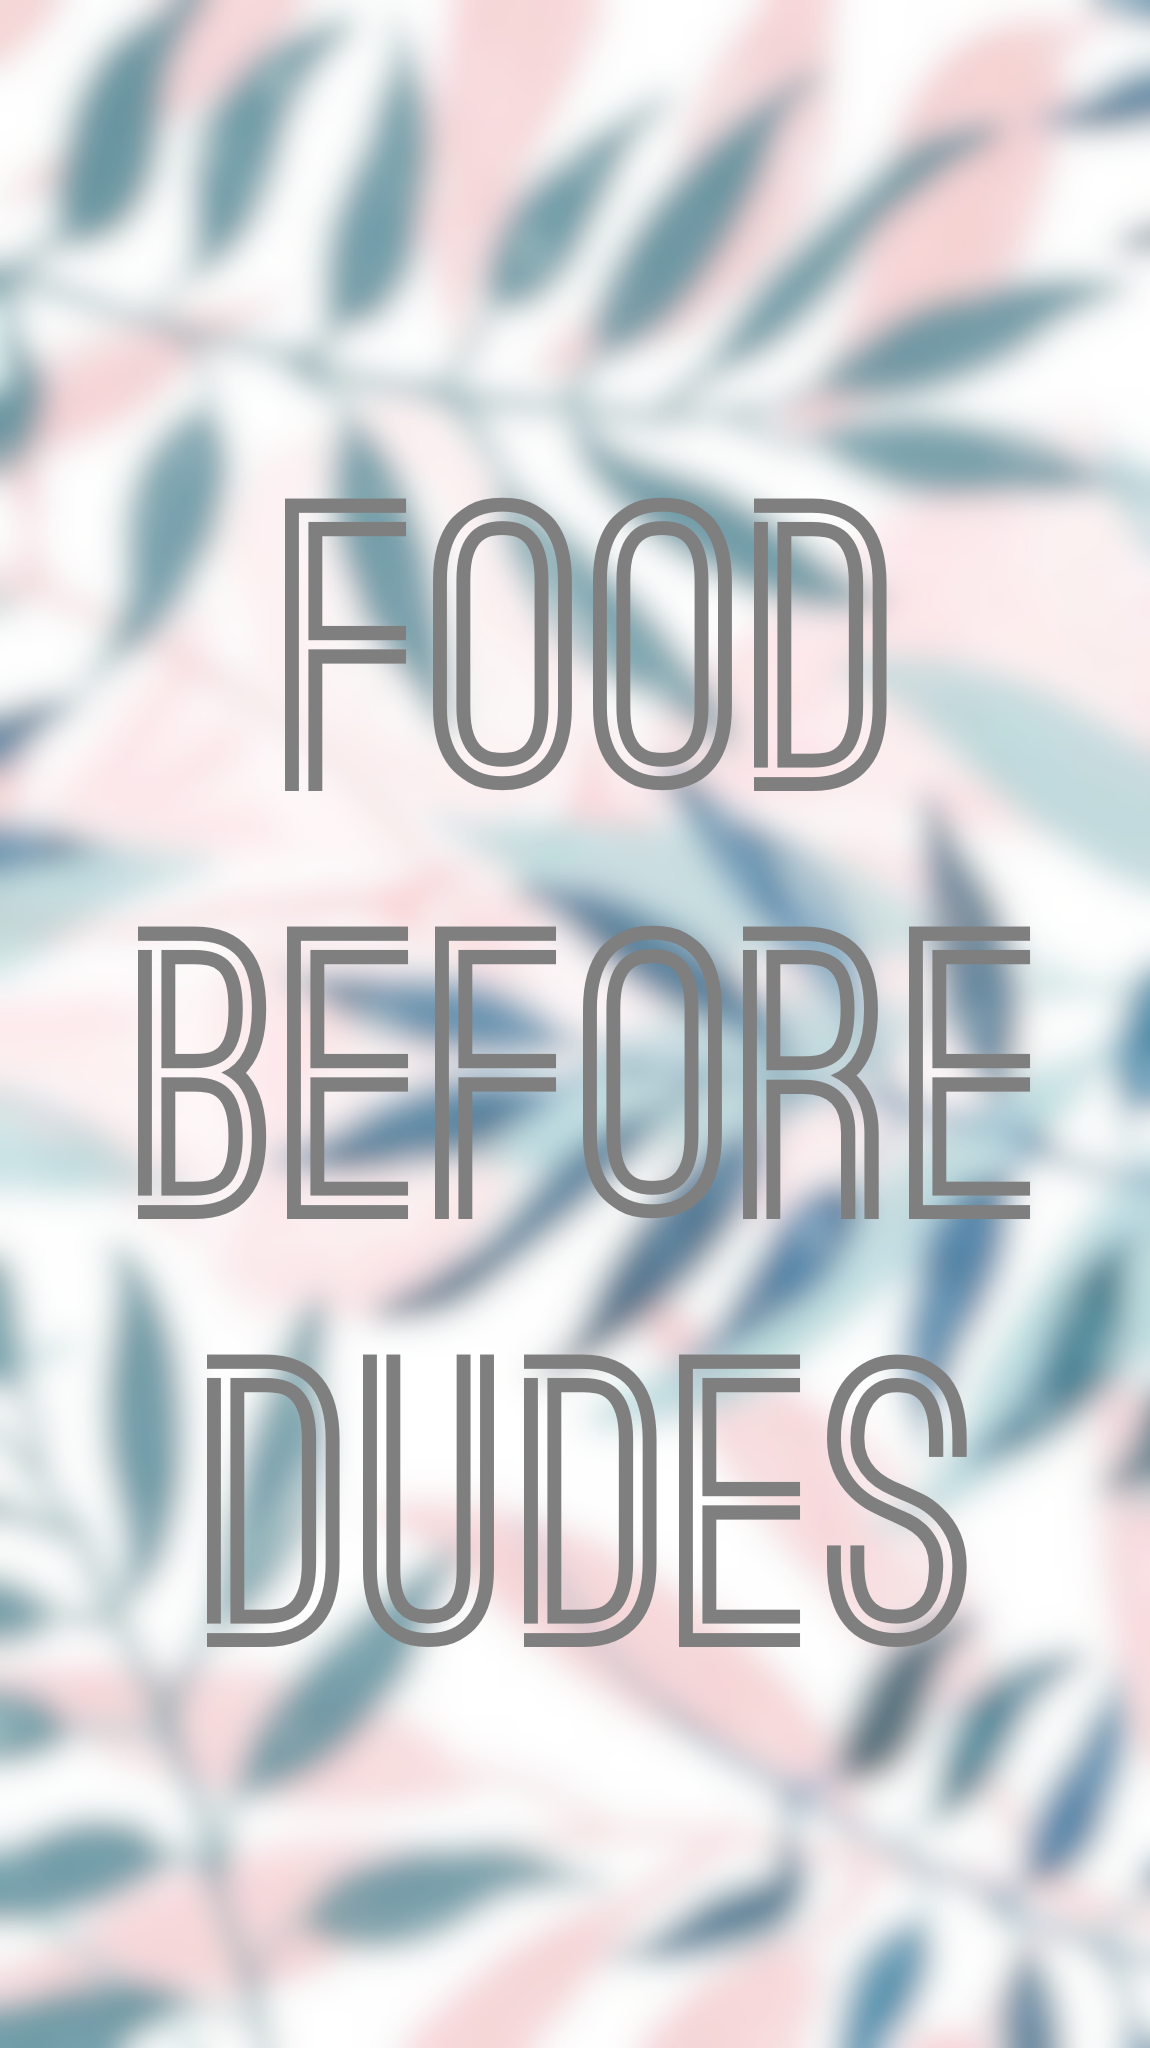 Quotes wallpaper food dudes blurry gray. Song lyrics wallpaper, Wallpaper quotes, Quotes